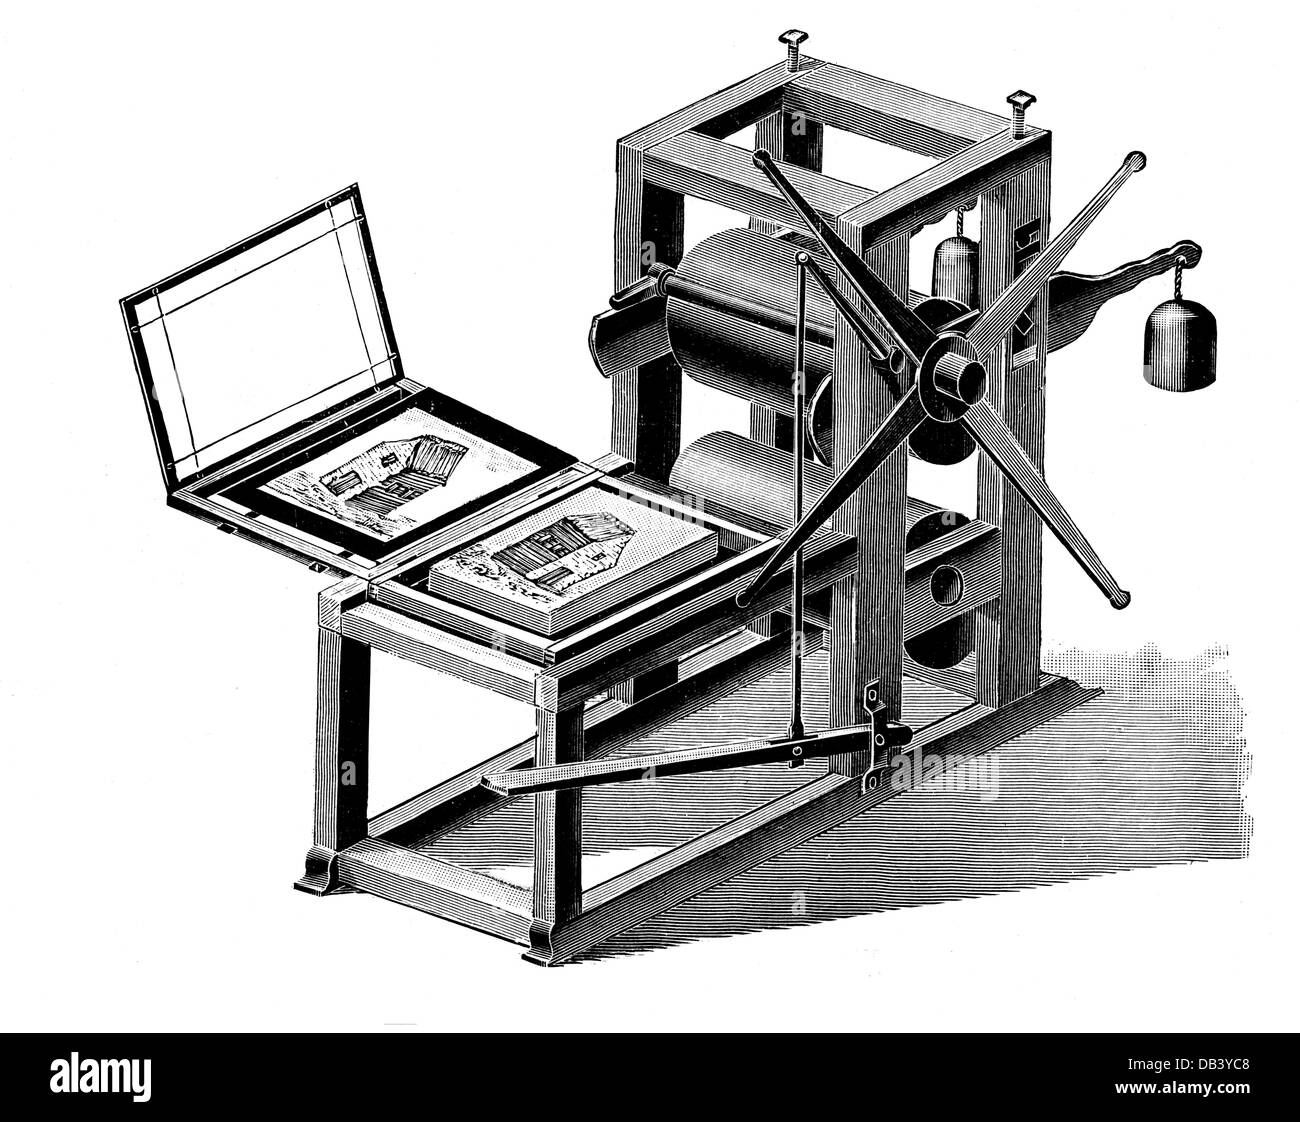 Senefelder, Alois, 6.11.1771 - 26.2.1834, the first stone printing press with two rolls, wood engraving, 19th century, Stock Photo